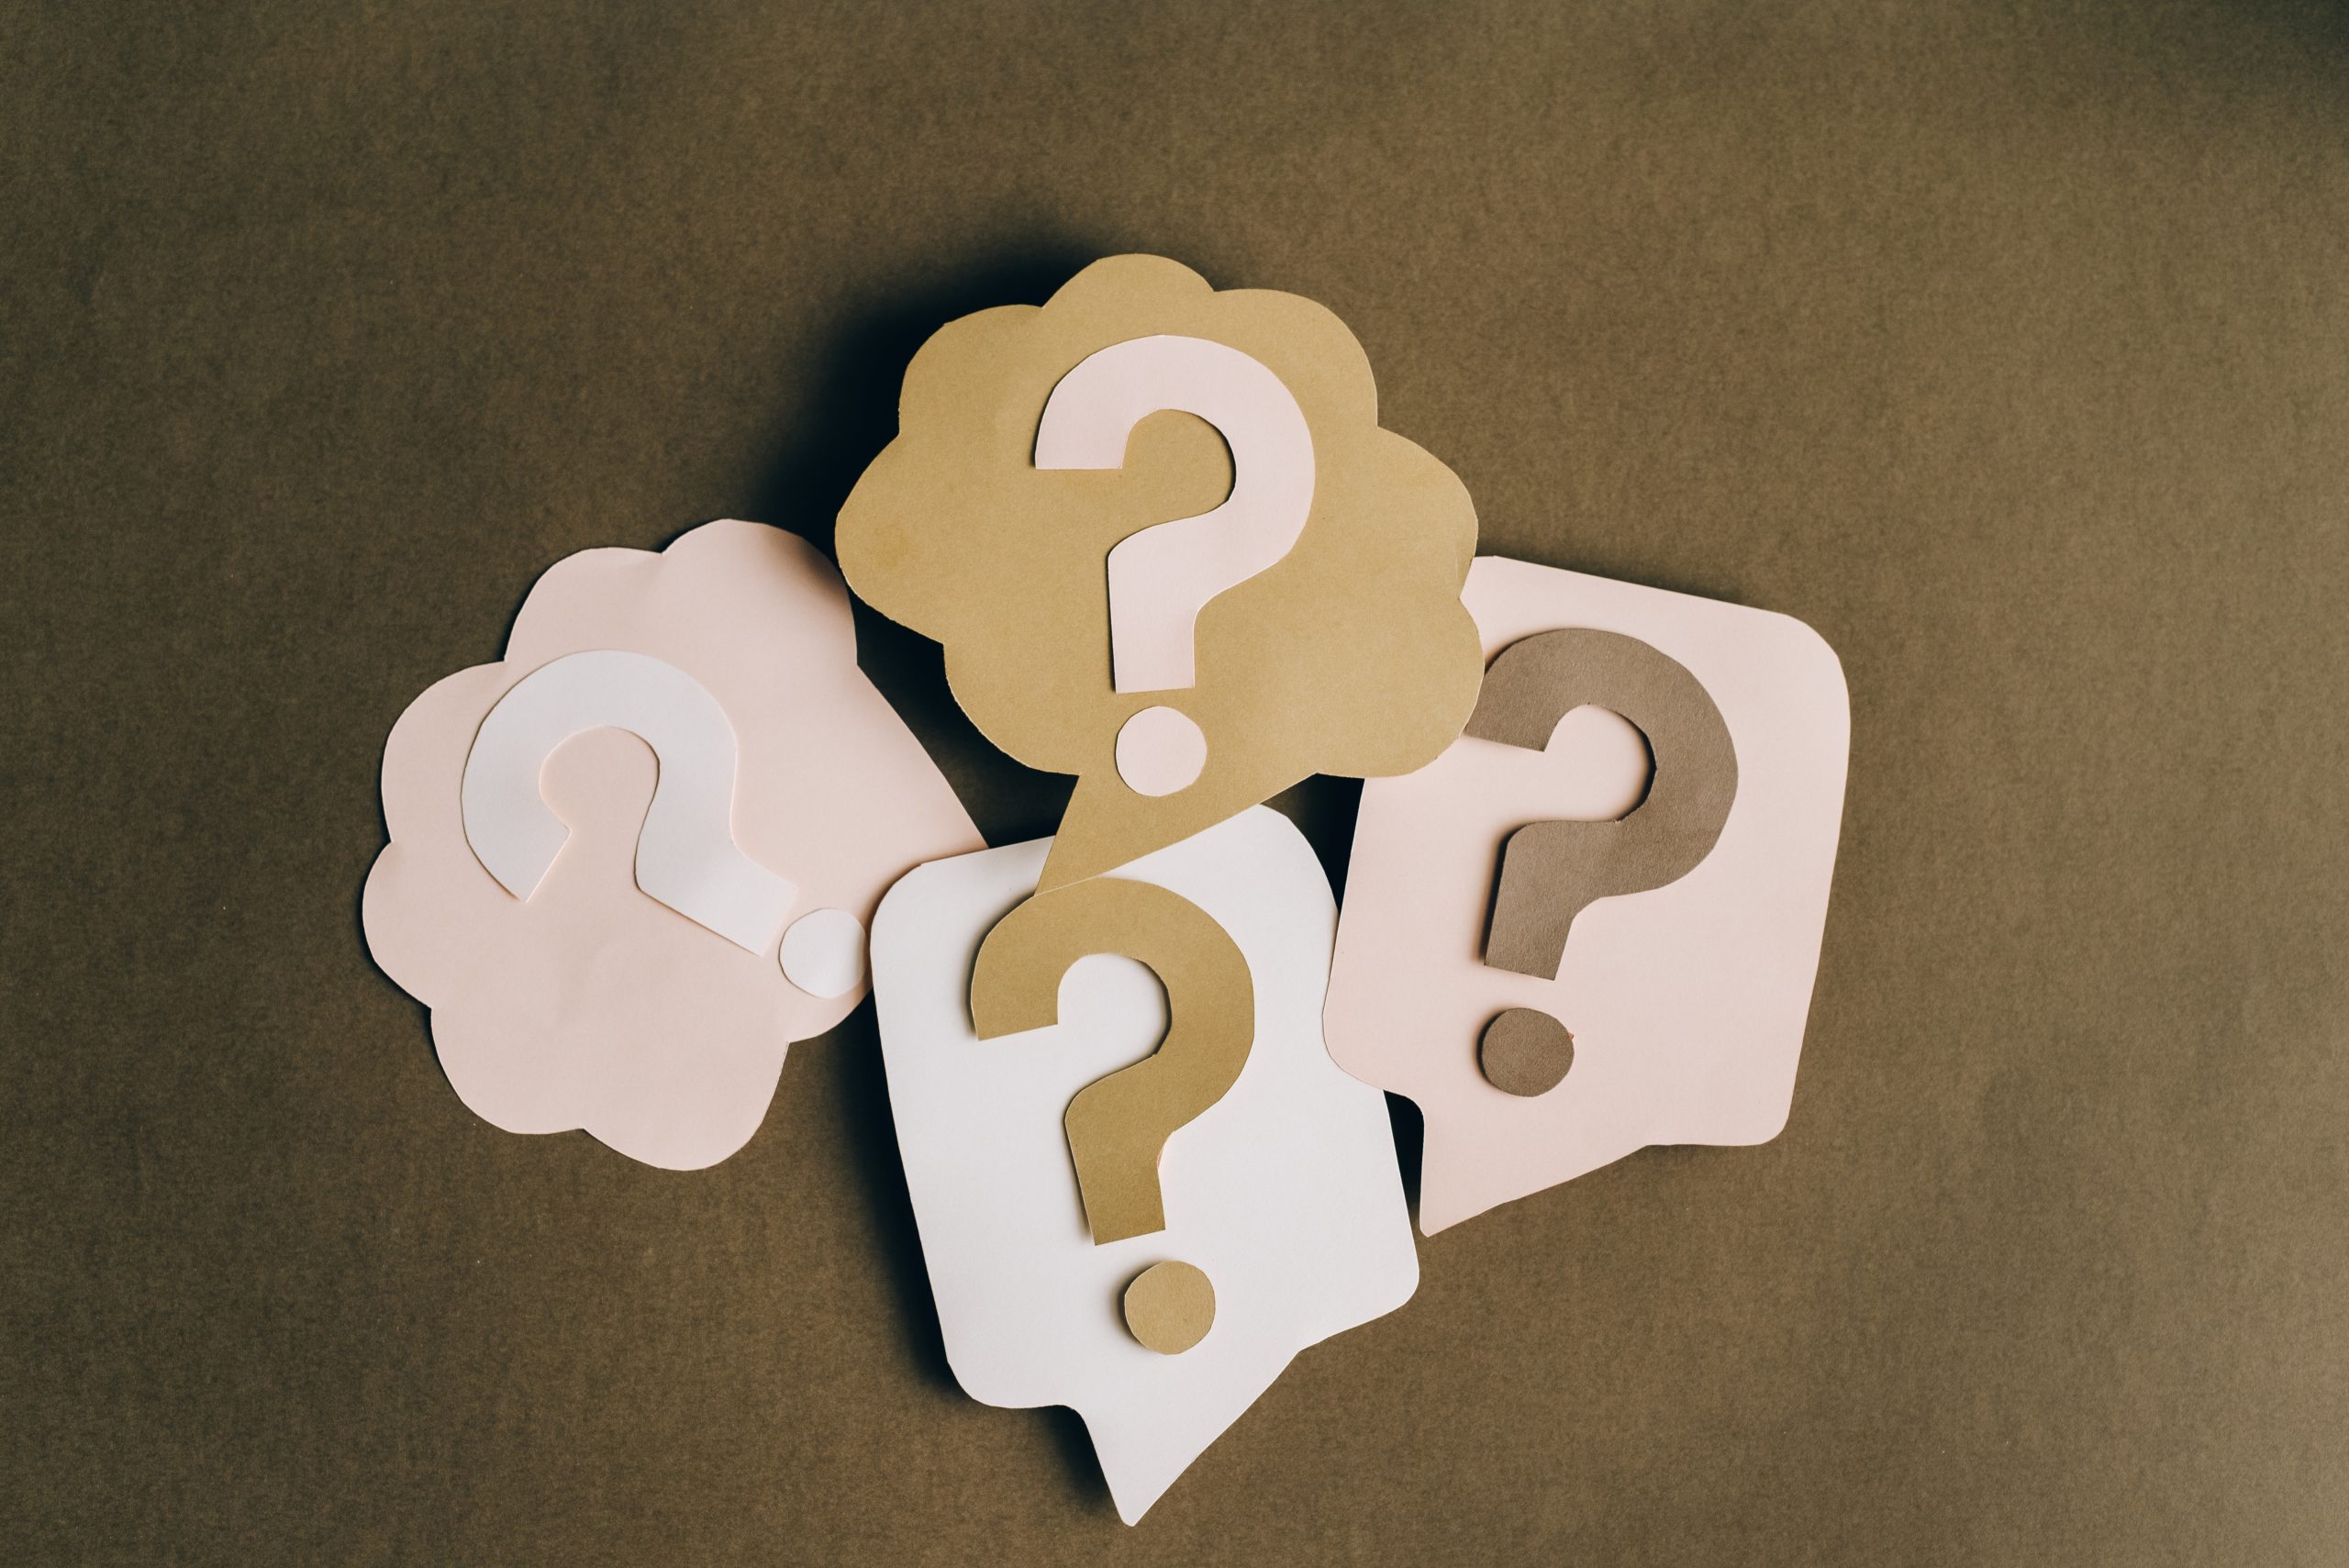 Question Marks on speech and thought bubbles - cardboard cutouts - decorative image